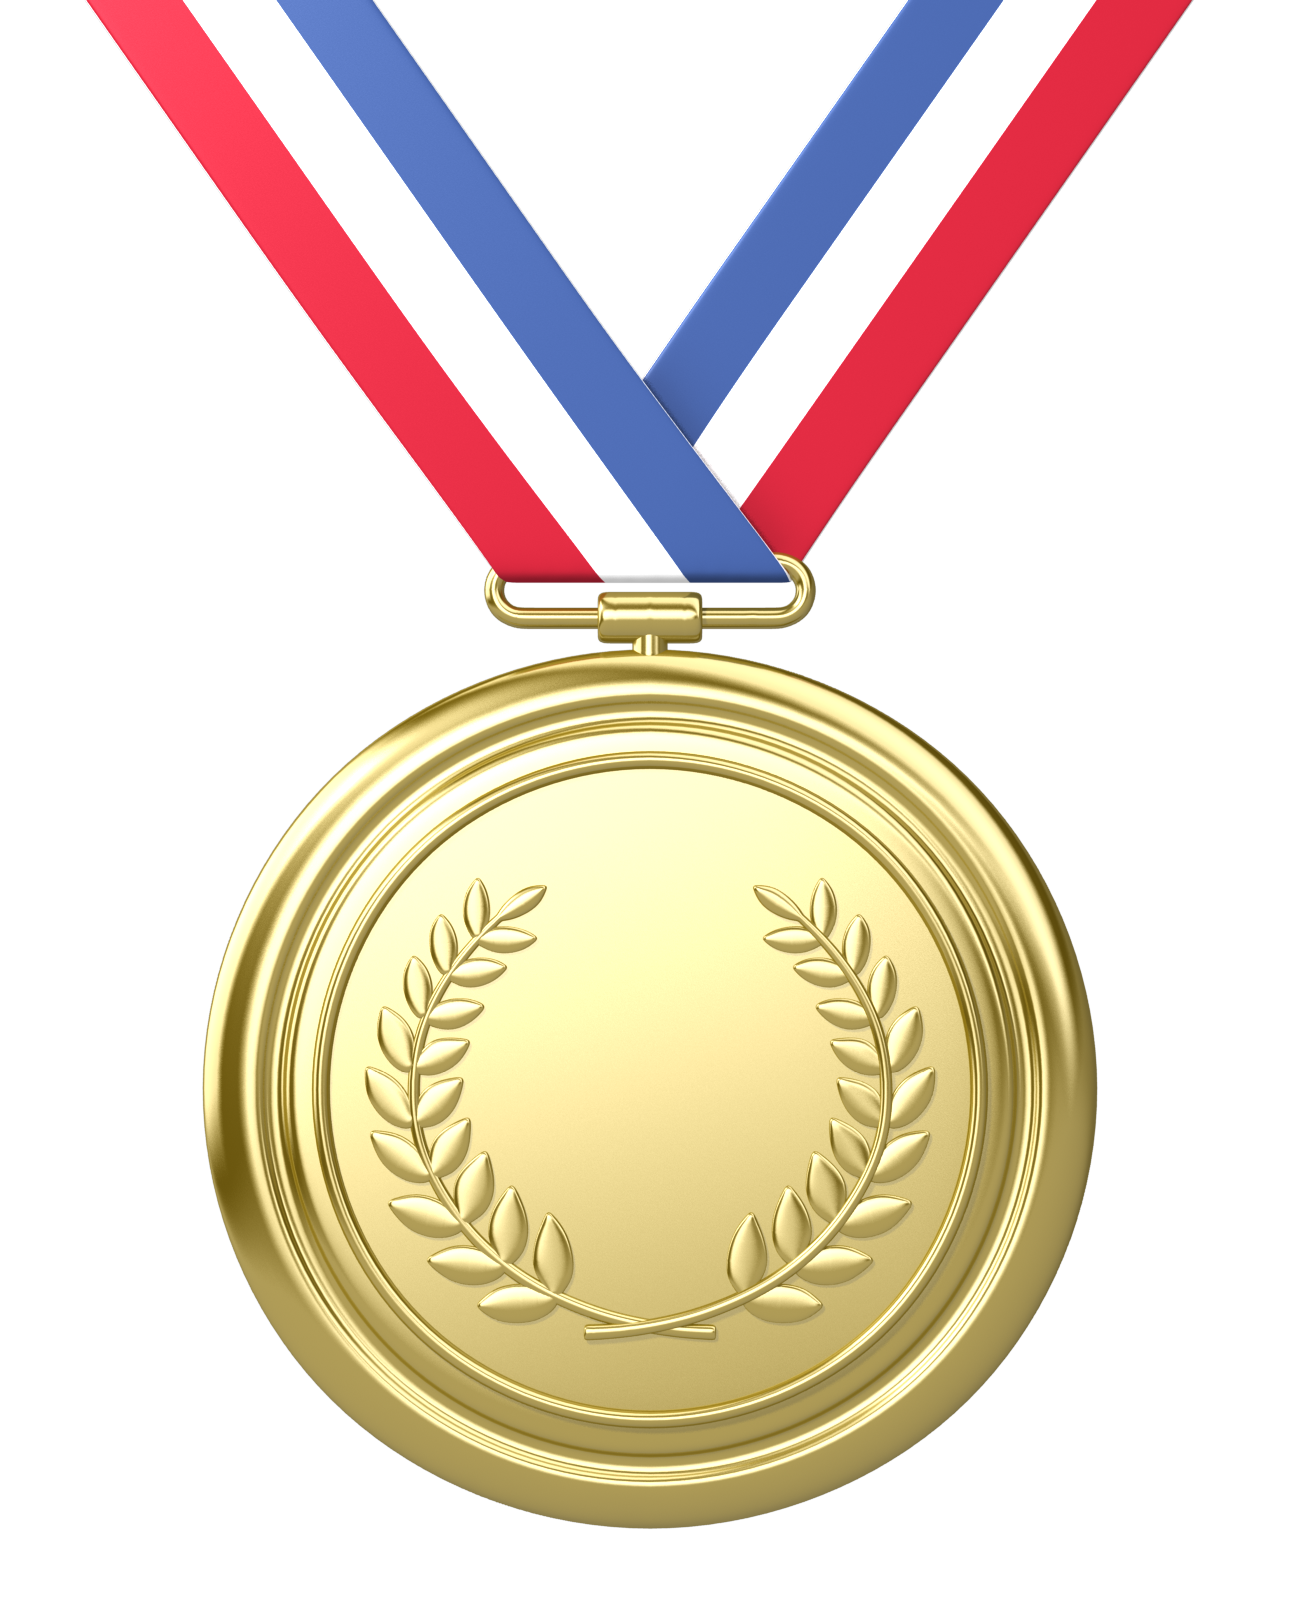 Personal Gold Medal Achievements. Gold medal, Medals, Gold